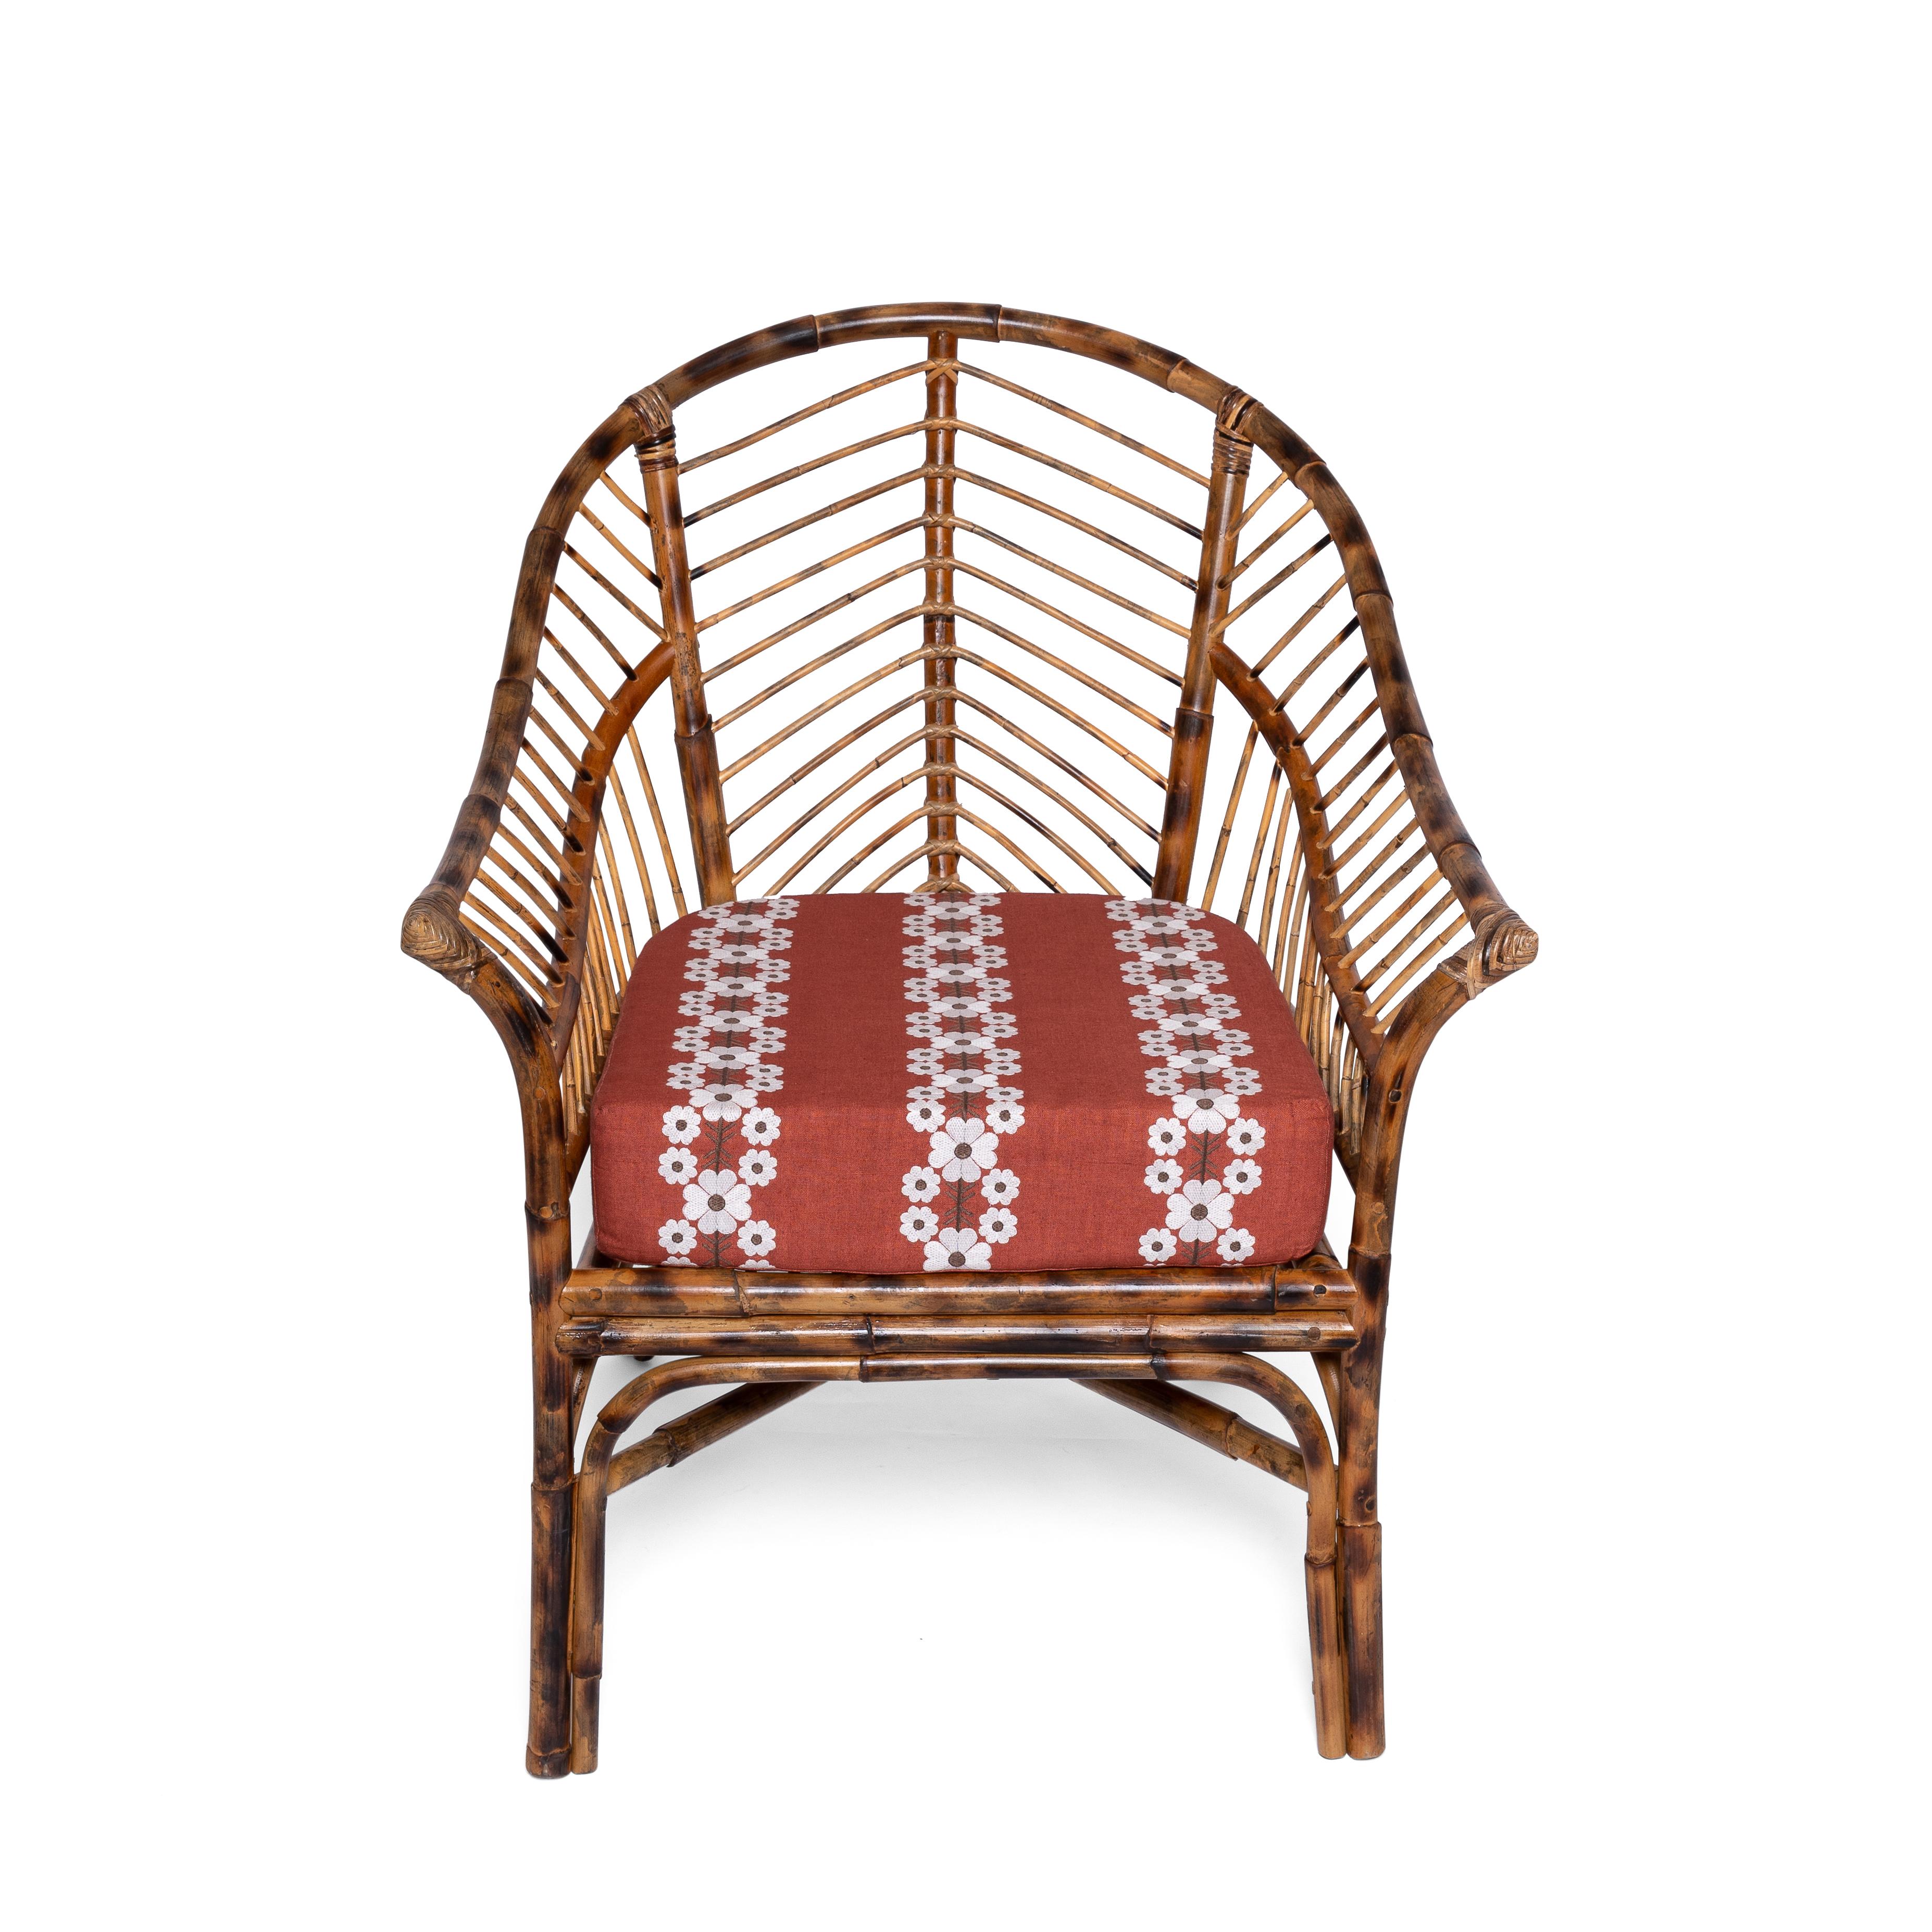 Indonesian Piolo Bamboo Chair in Natural Honey Rattan, Modern furniture by Louise Roe